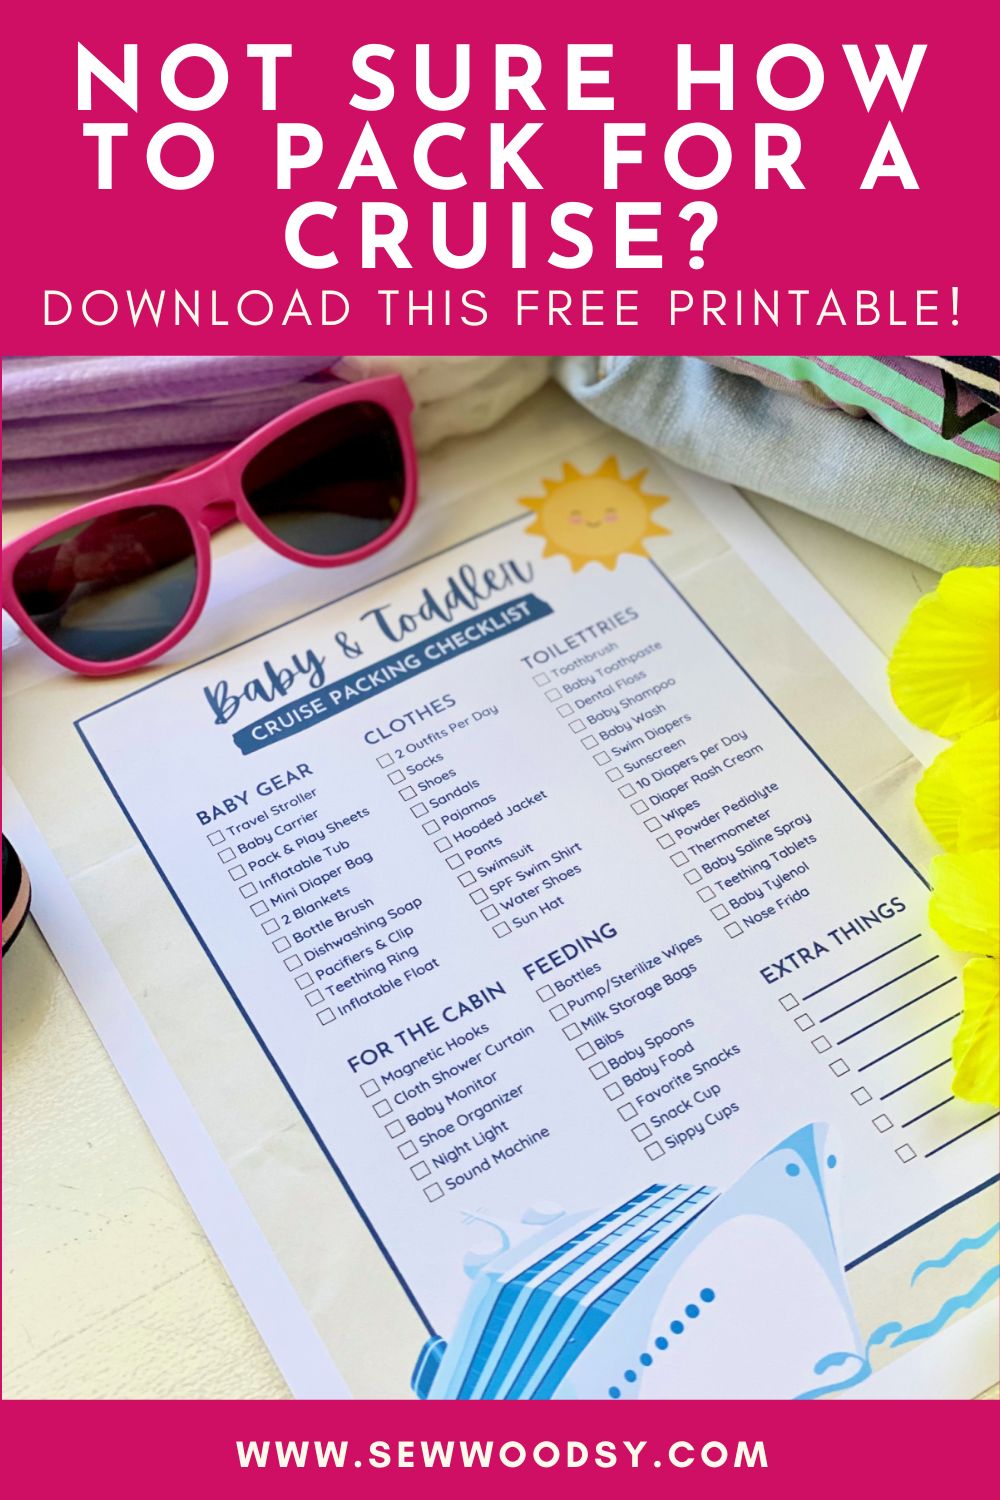 Printable checklist with sunglasses and text on image for Pinterest.